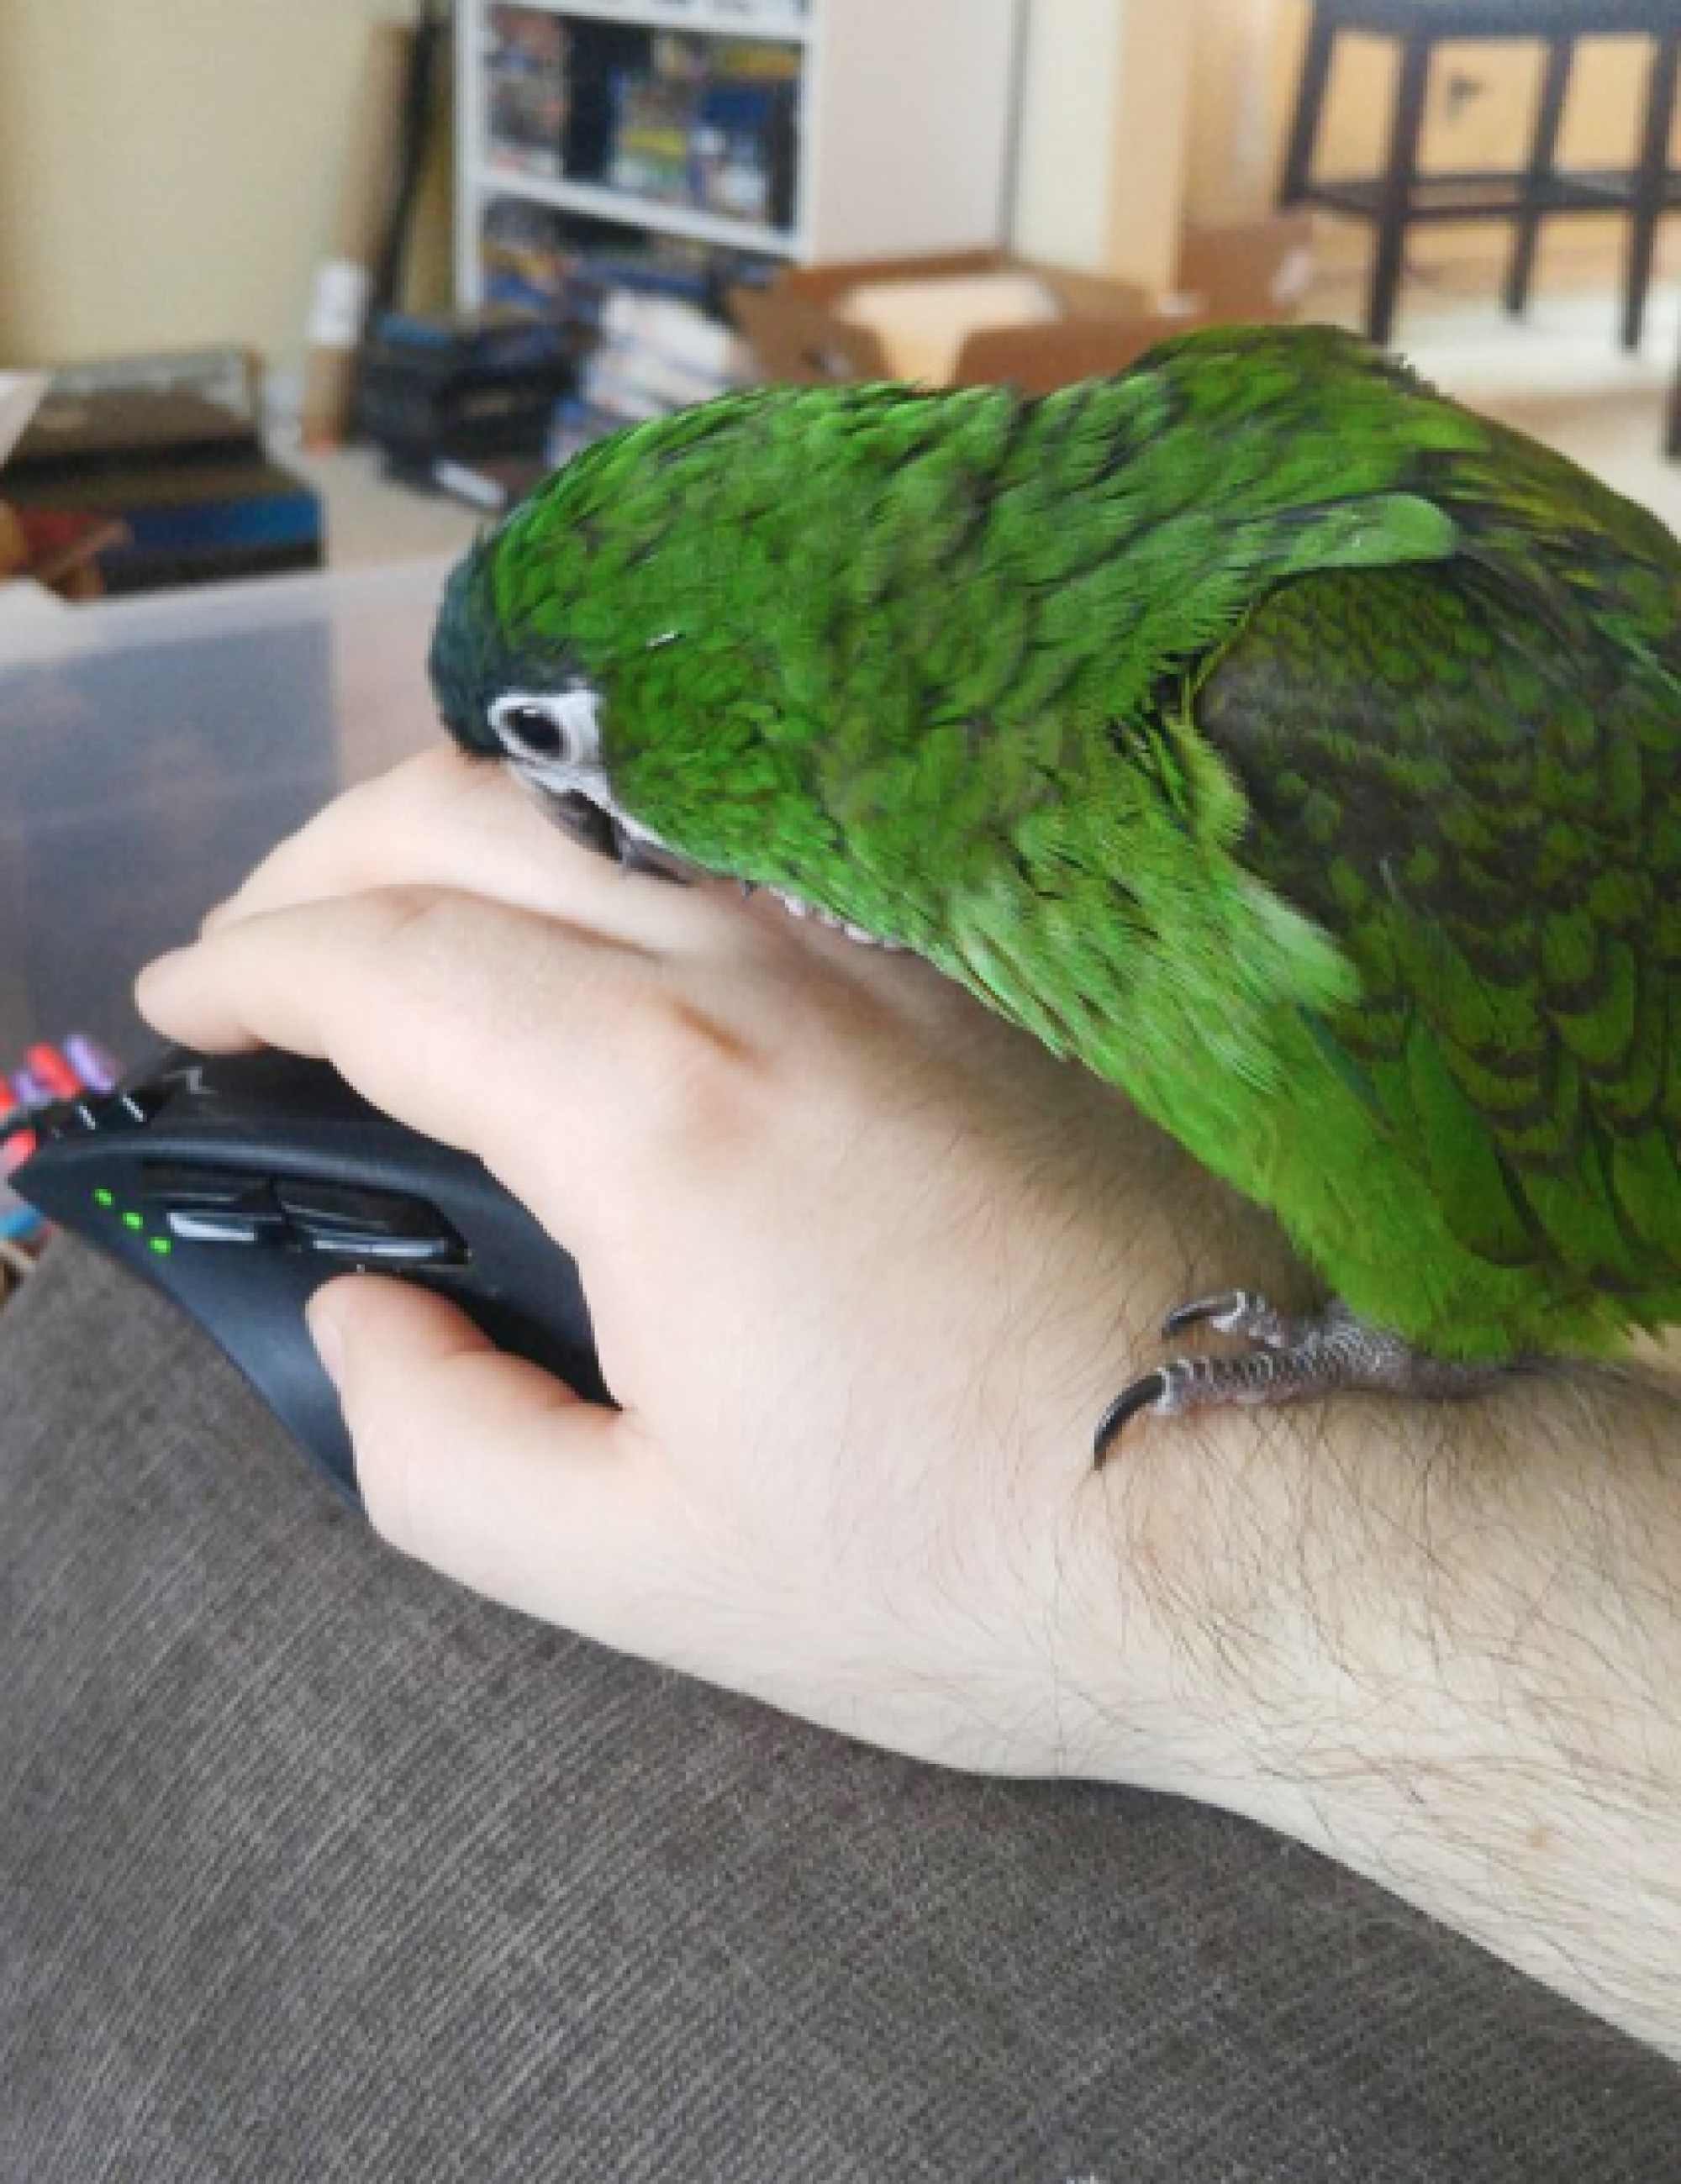 A green bird standing on a person's hand